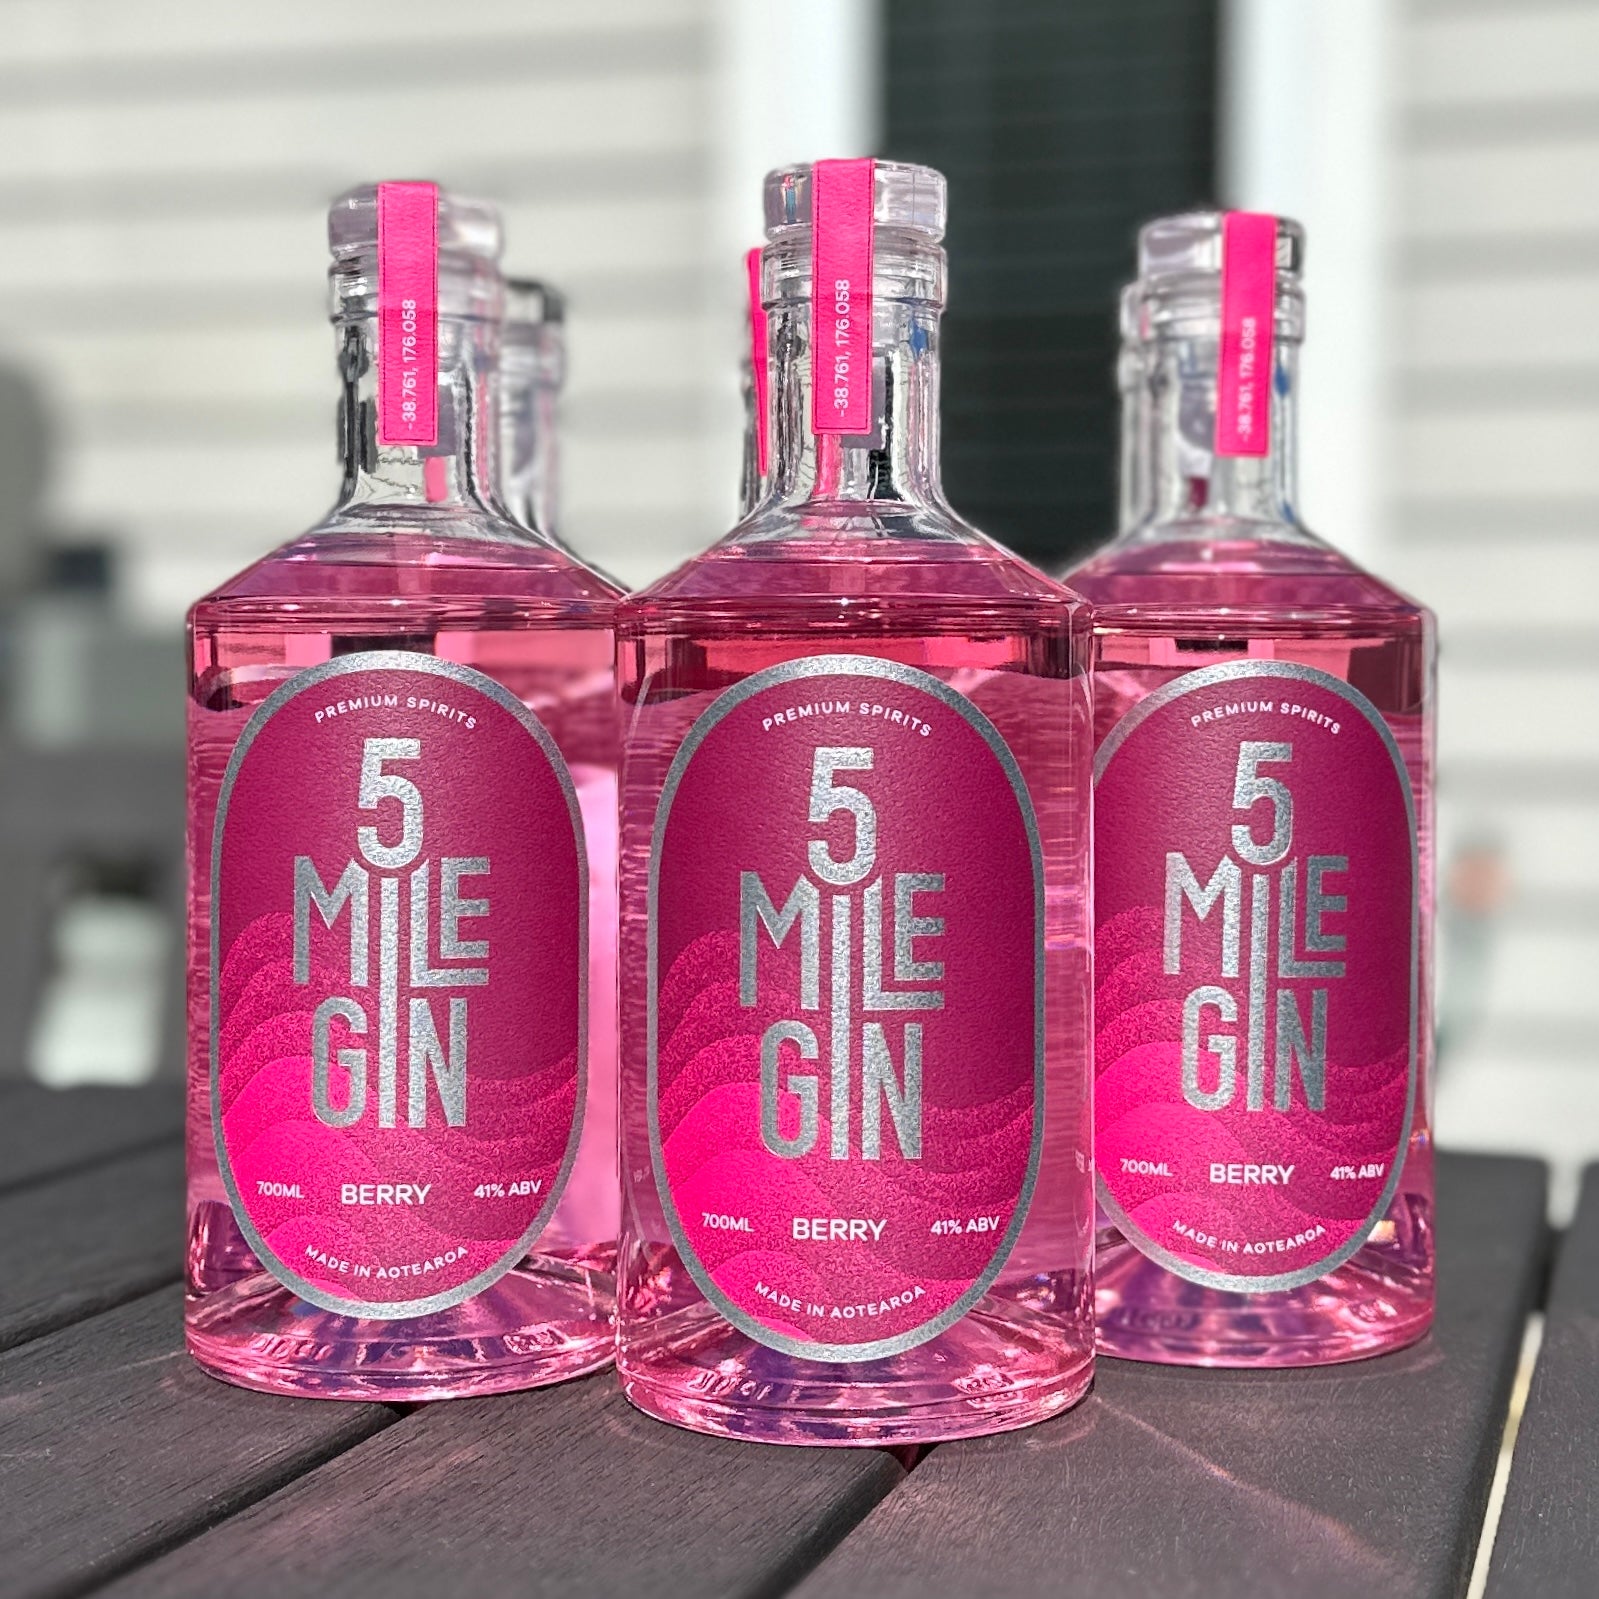 5 Mile Berry Gin